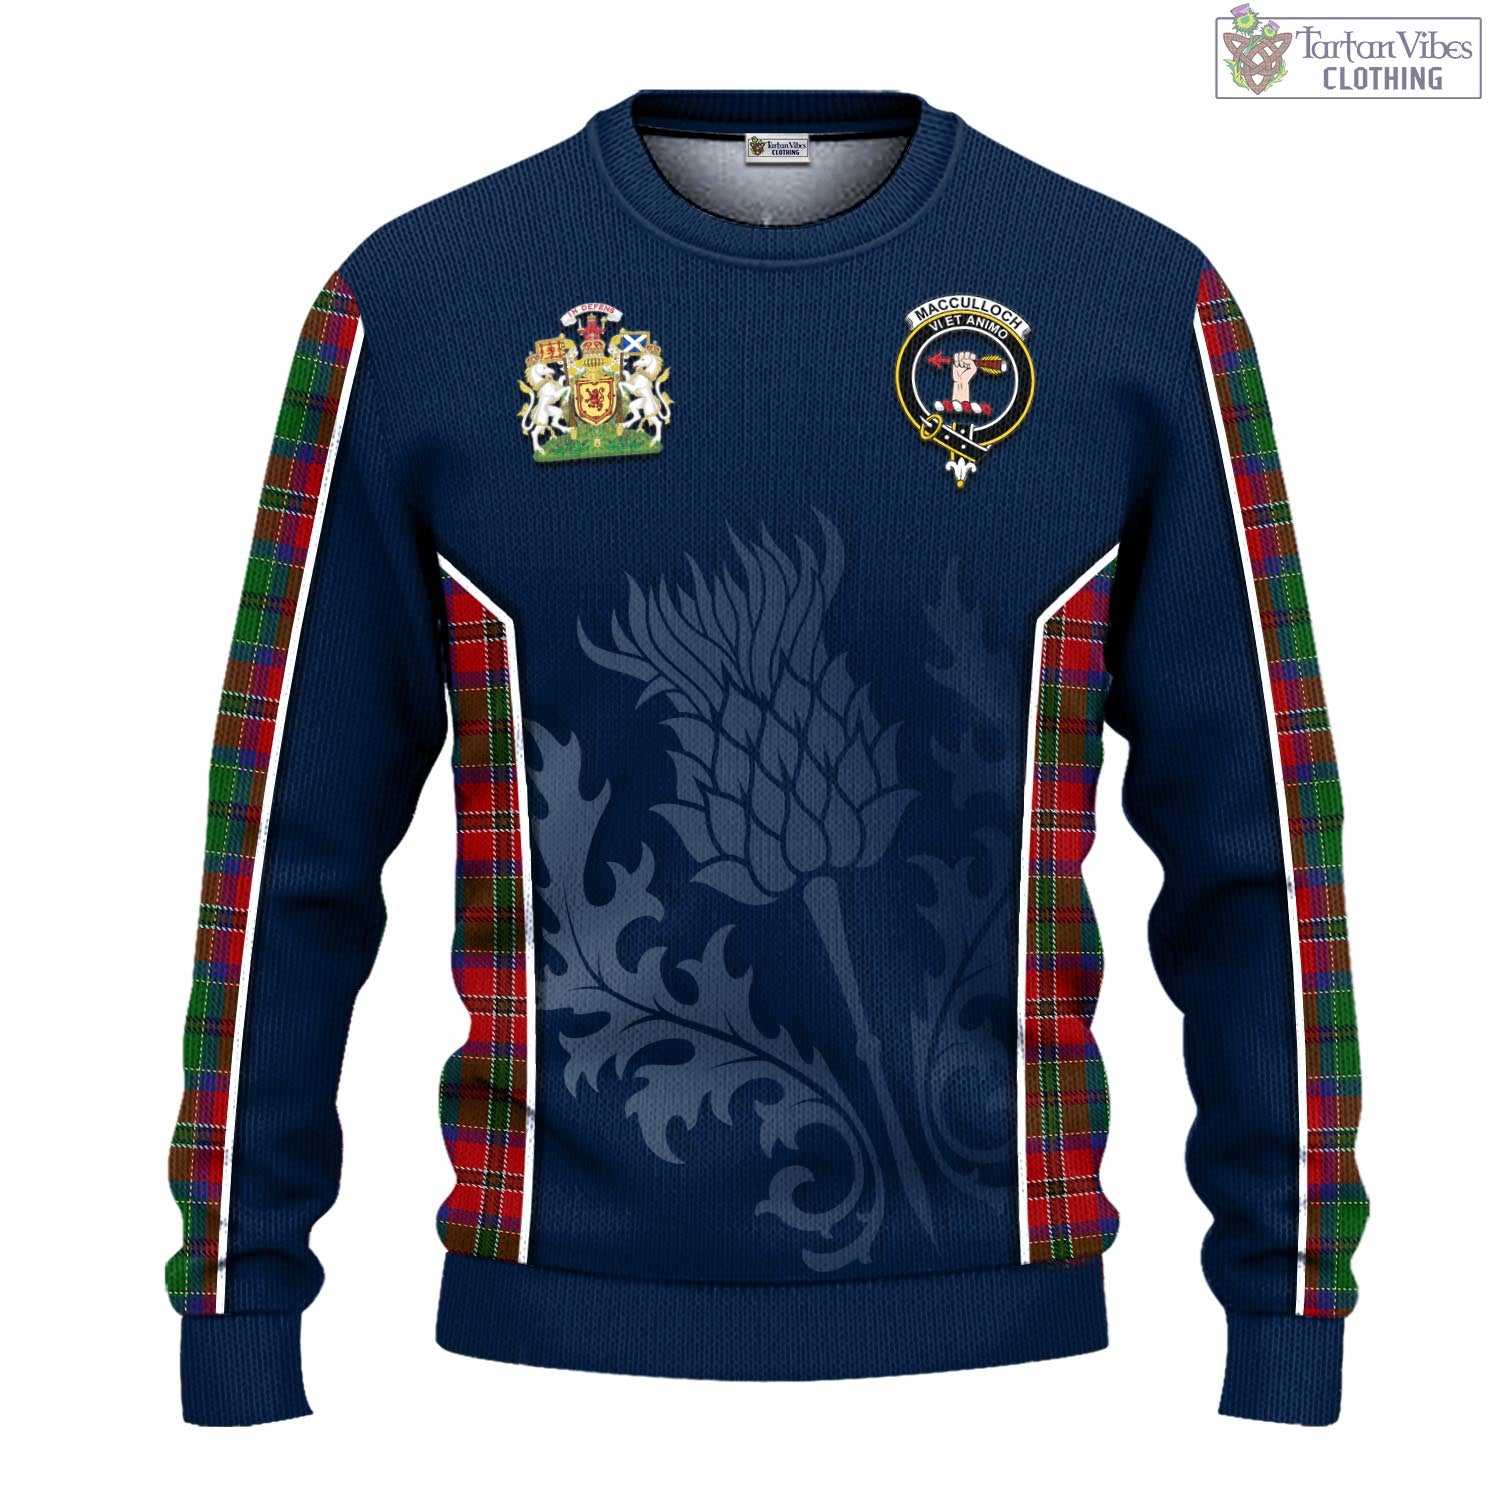 Tartan Vibes Clothing MacCulloch Tartan Knitted Sweatshirt with Family Crest and Scottish Thistle Vibes Sport Style